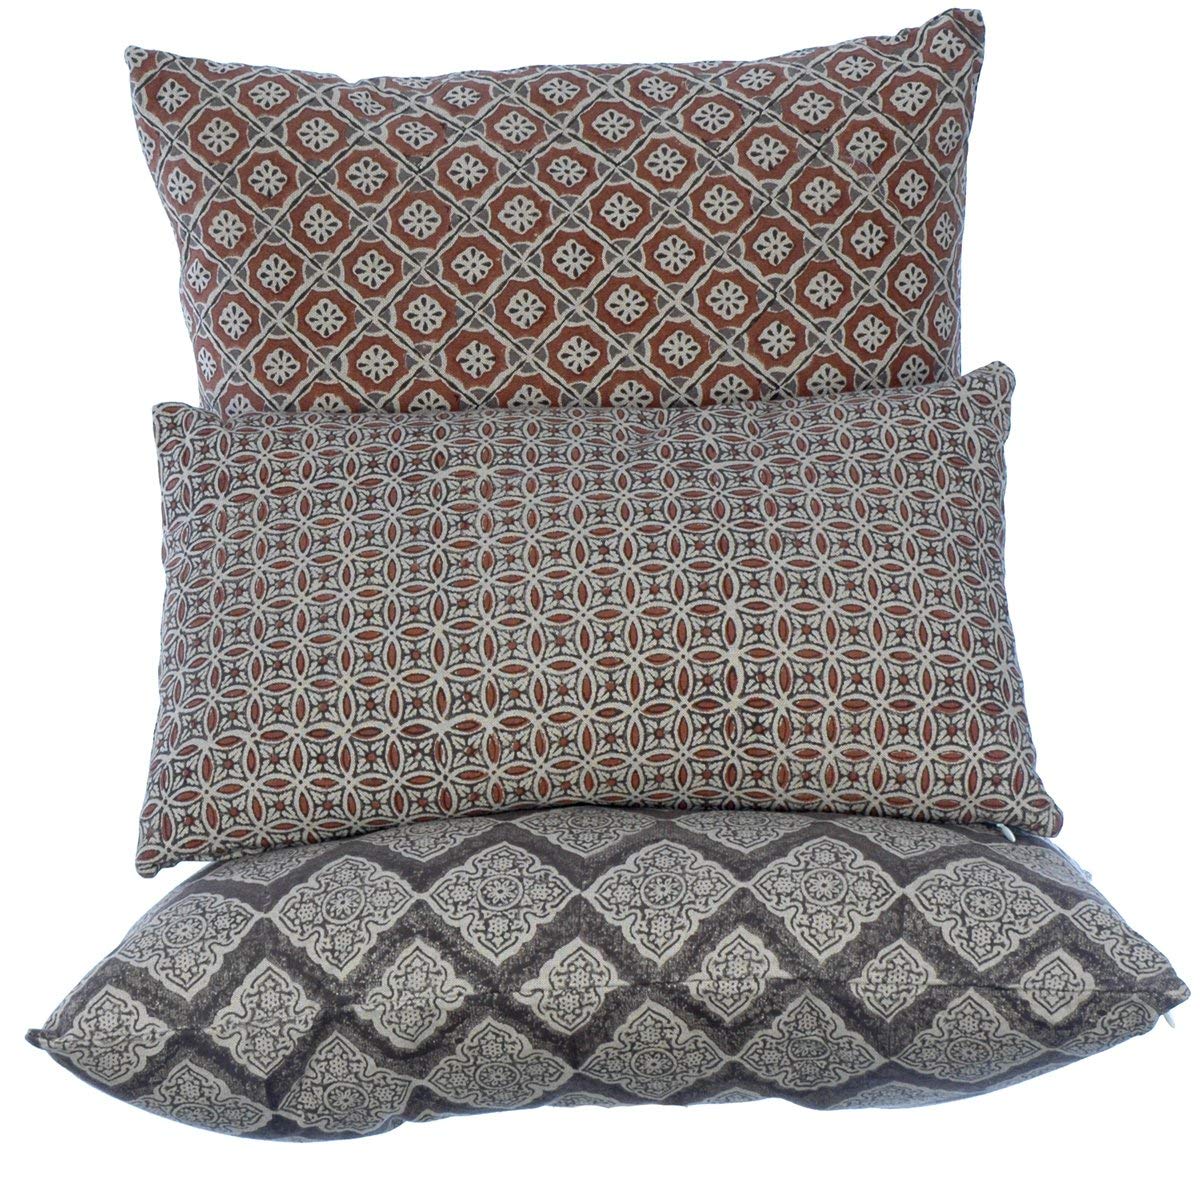 Potager Collection Cotton Cushion in Bronze Rings 30x50